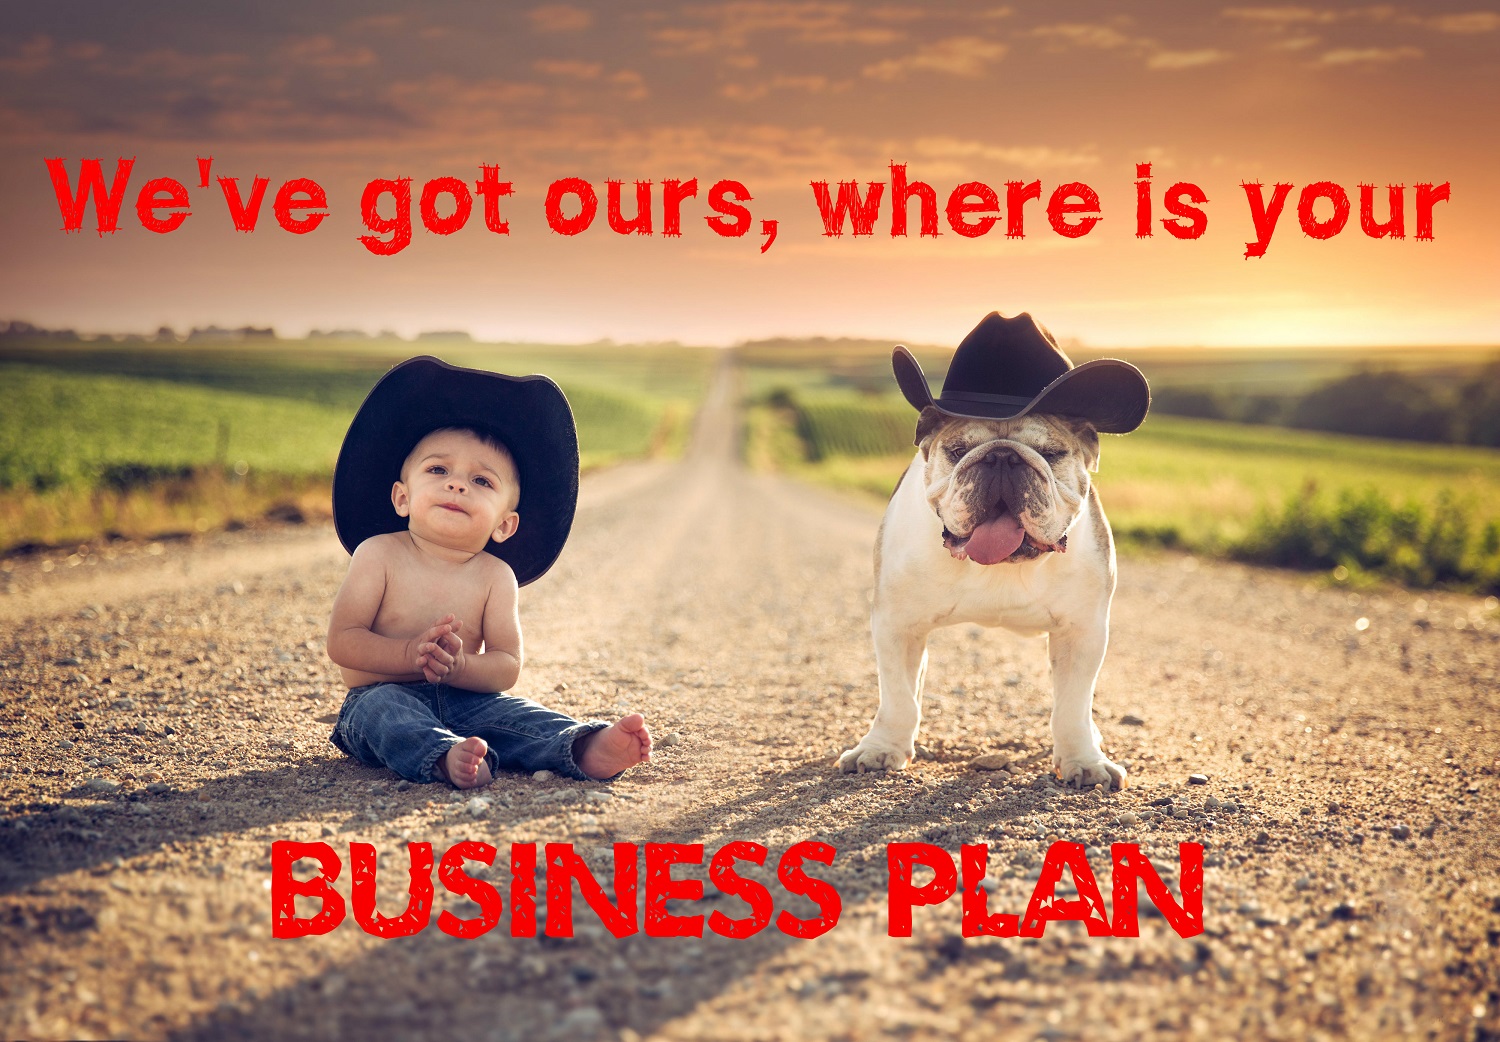 Business plans: are they required when seeking financing?